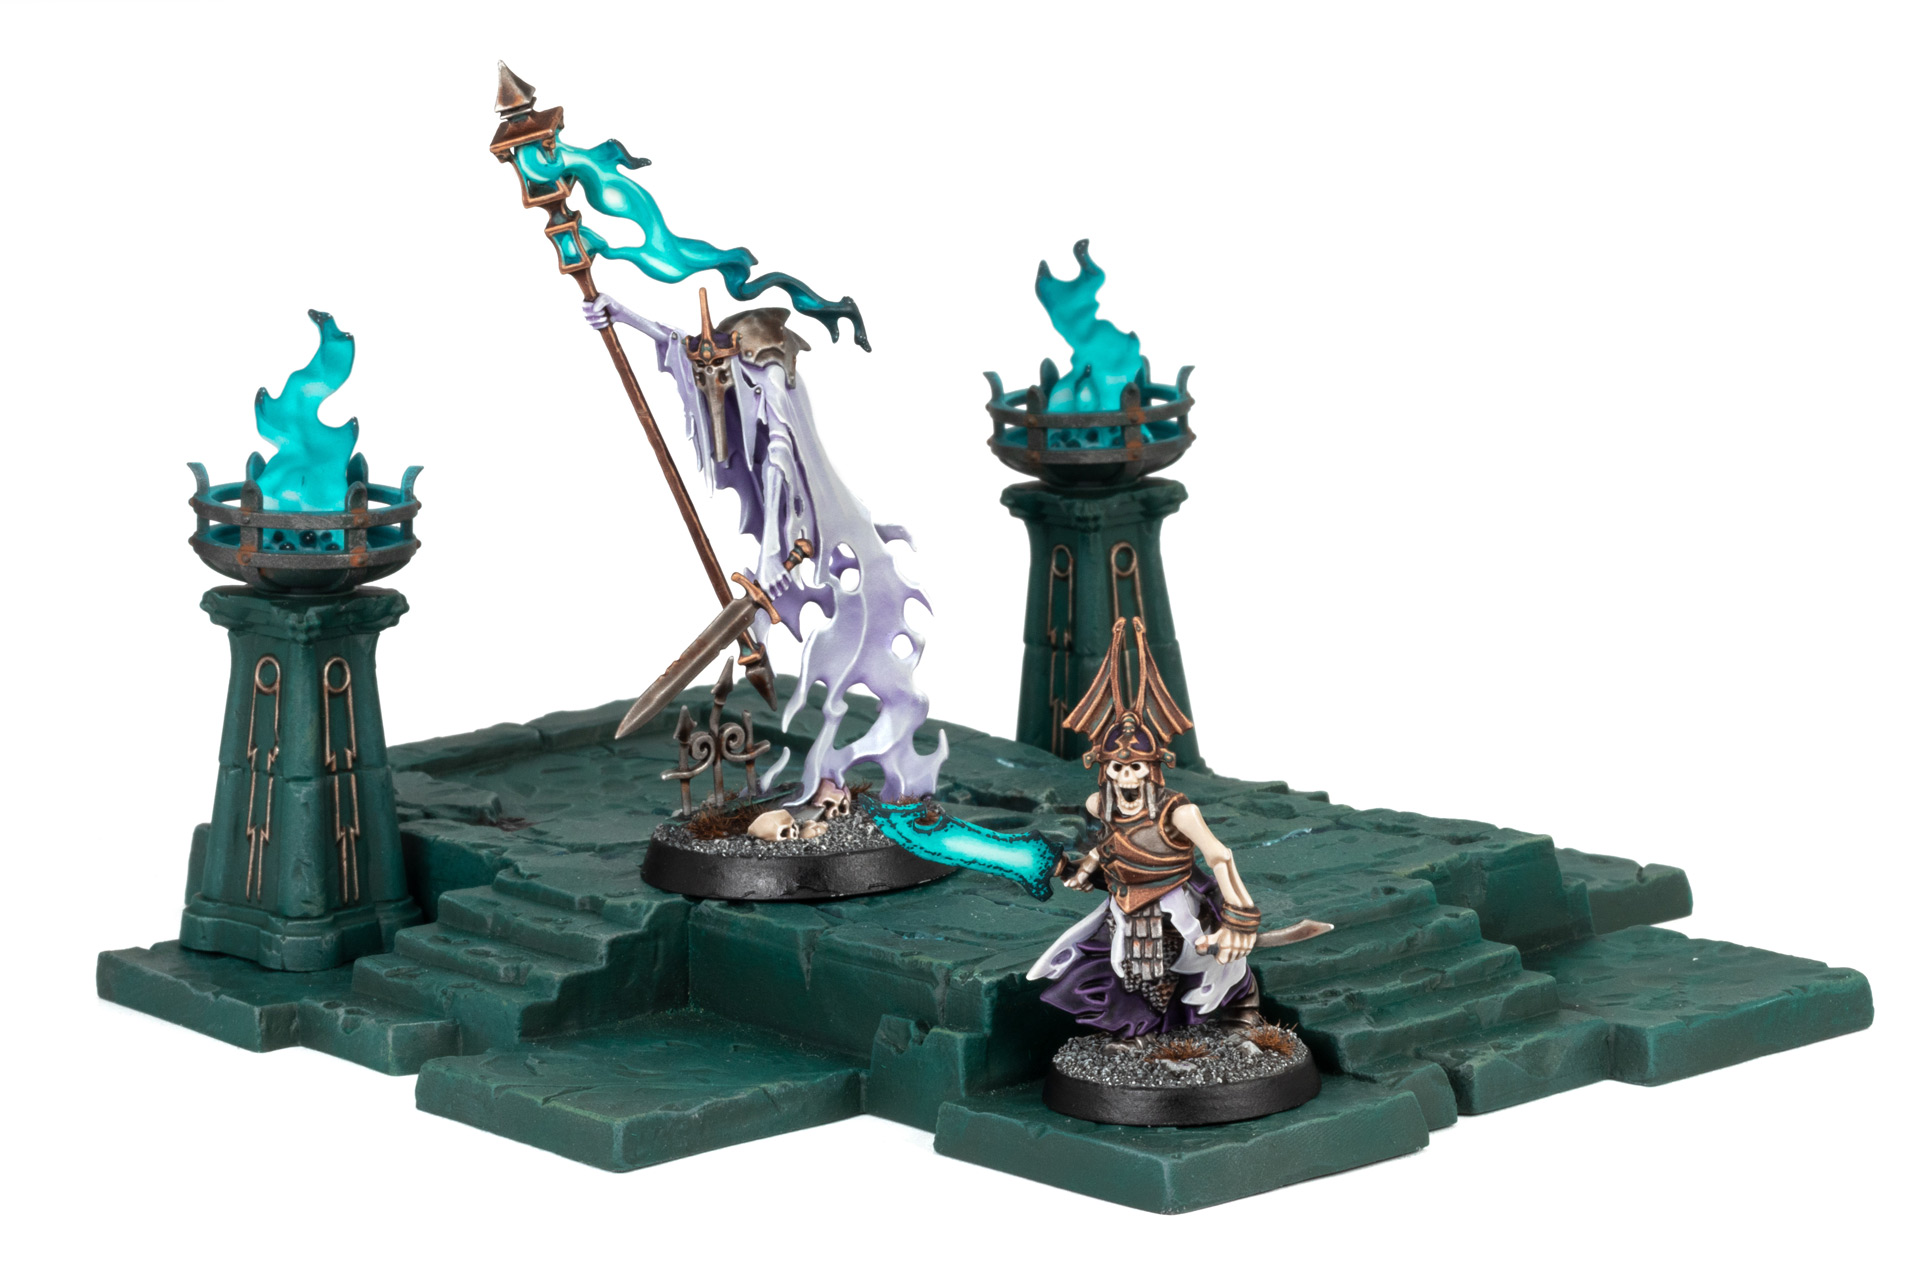 Warhammer Fantasy Arcane Ruins baseplate and braziers with Nighthaunt and Grave Guard